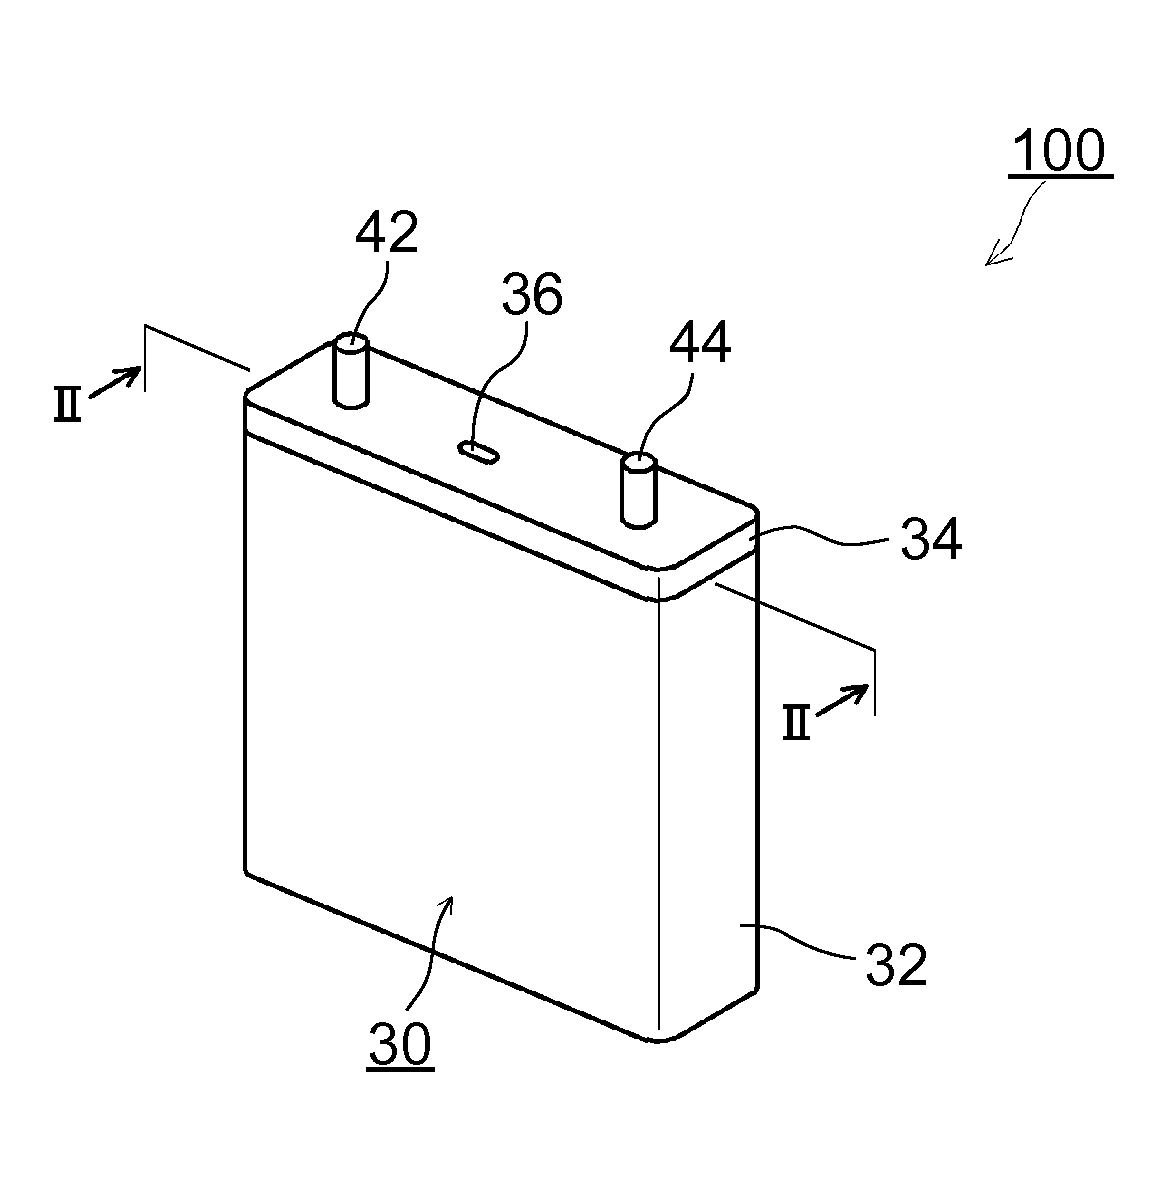 Lithium-ion secondary battery and method of manufacturing
the same